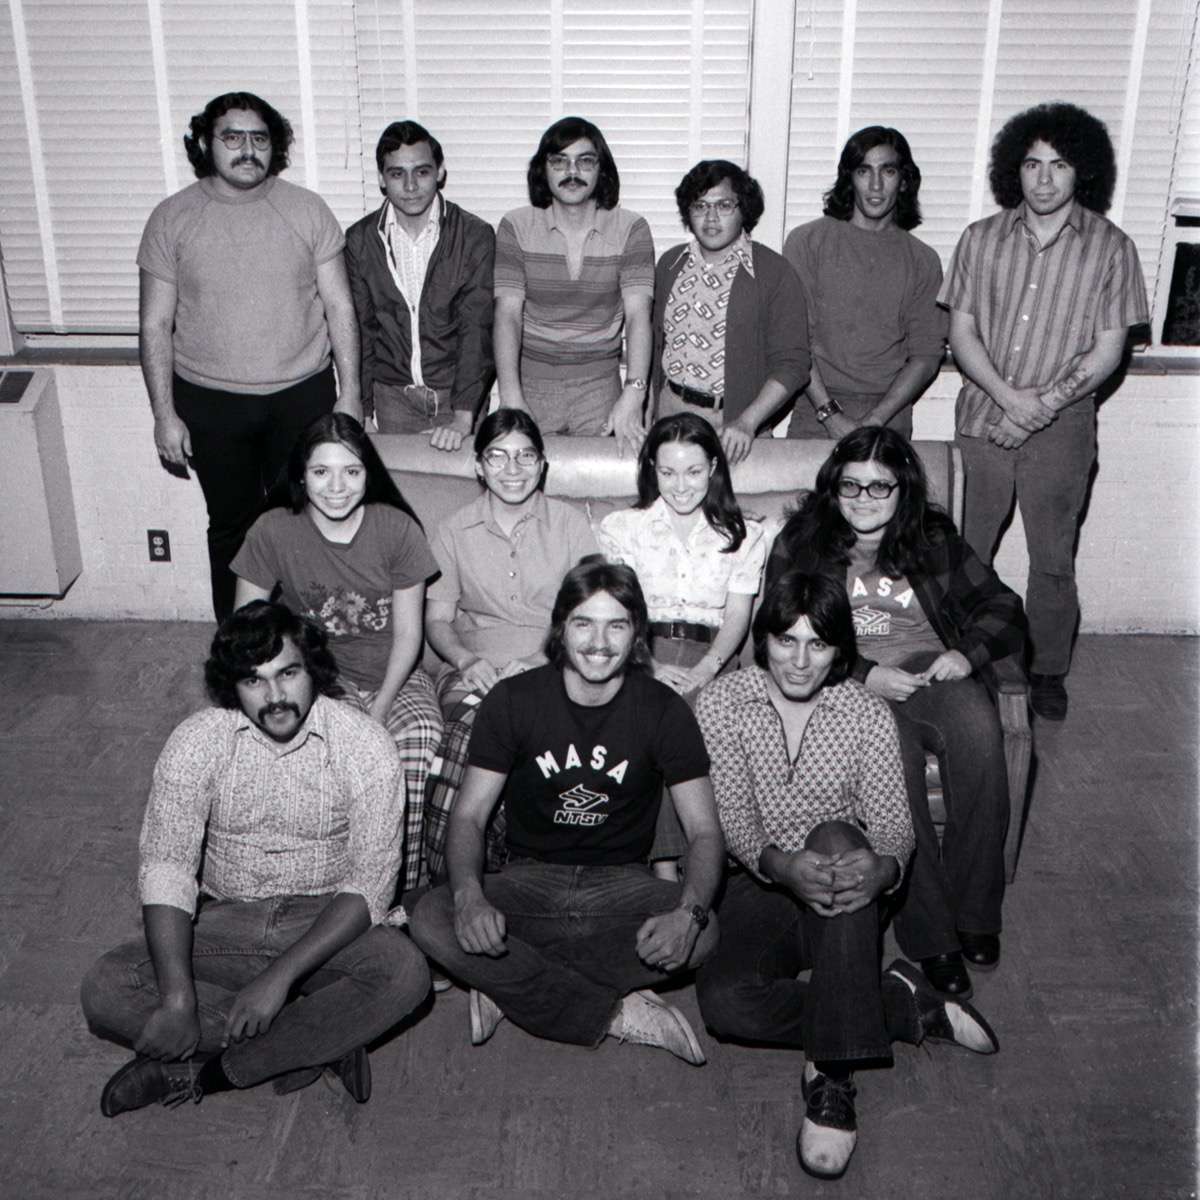 Group of 13 people. The first row is 3 men sitting down, the middle row is 4 women sitting on a couch behind them. Behind the couch is a row of 5 men and 1 woman standing up.